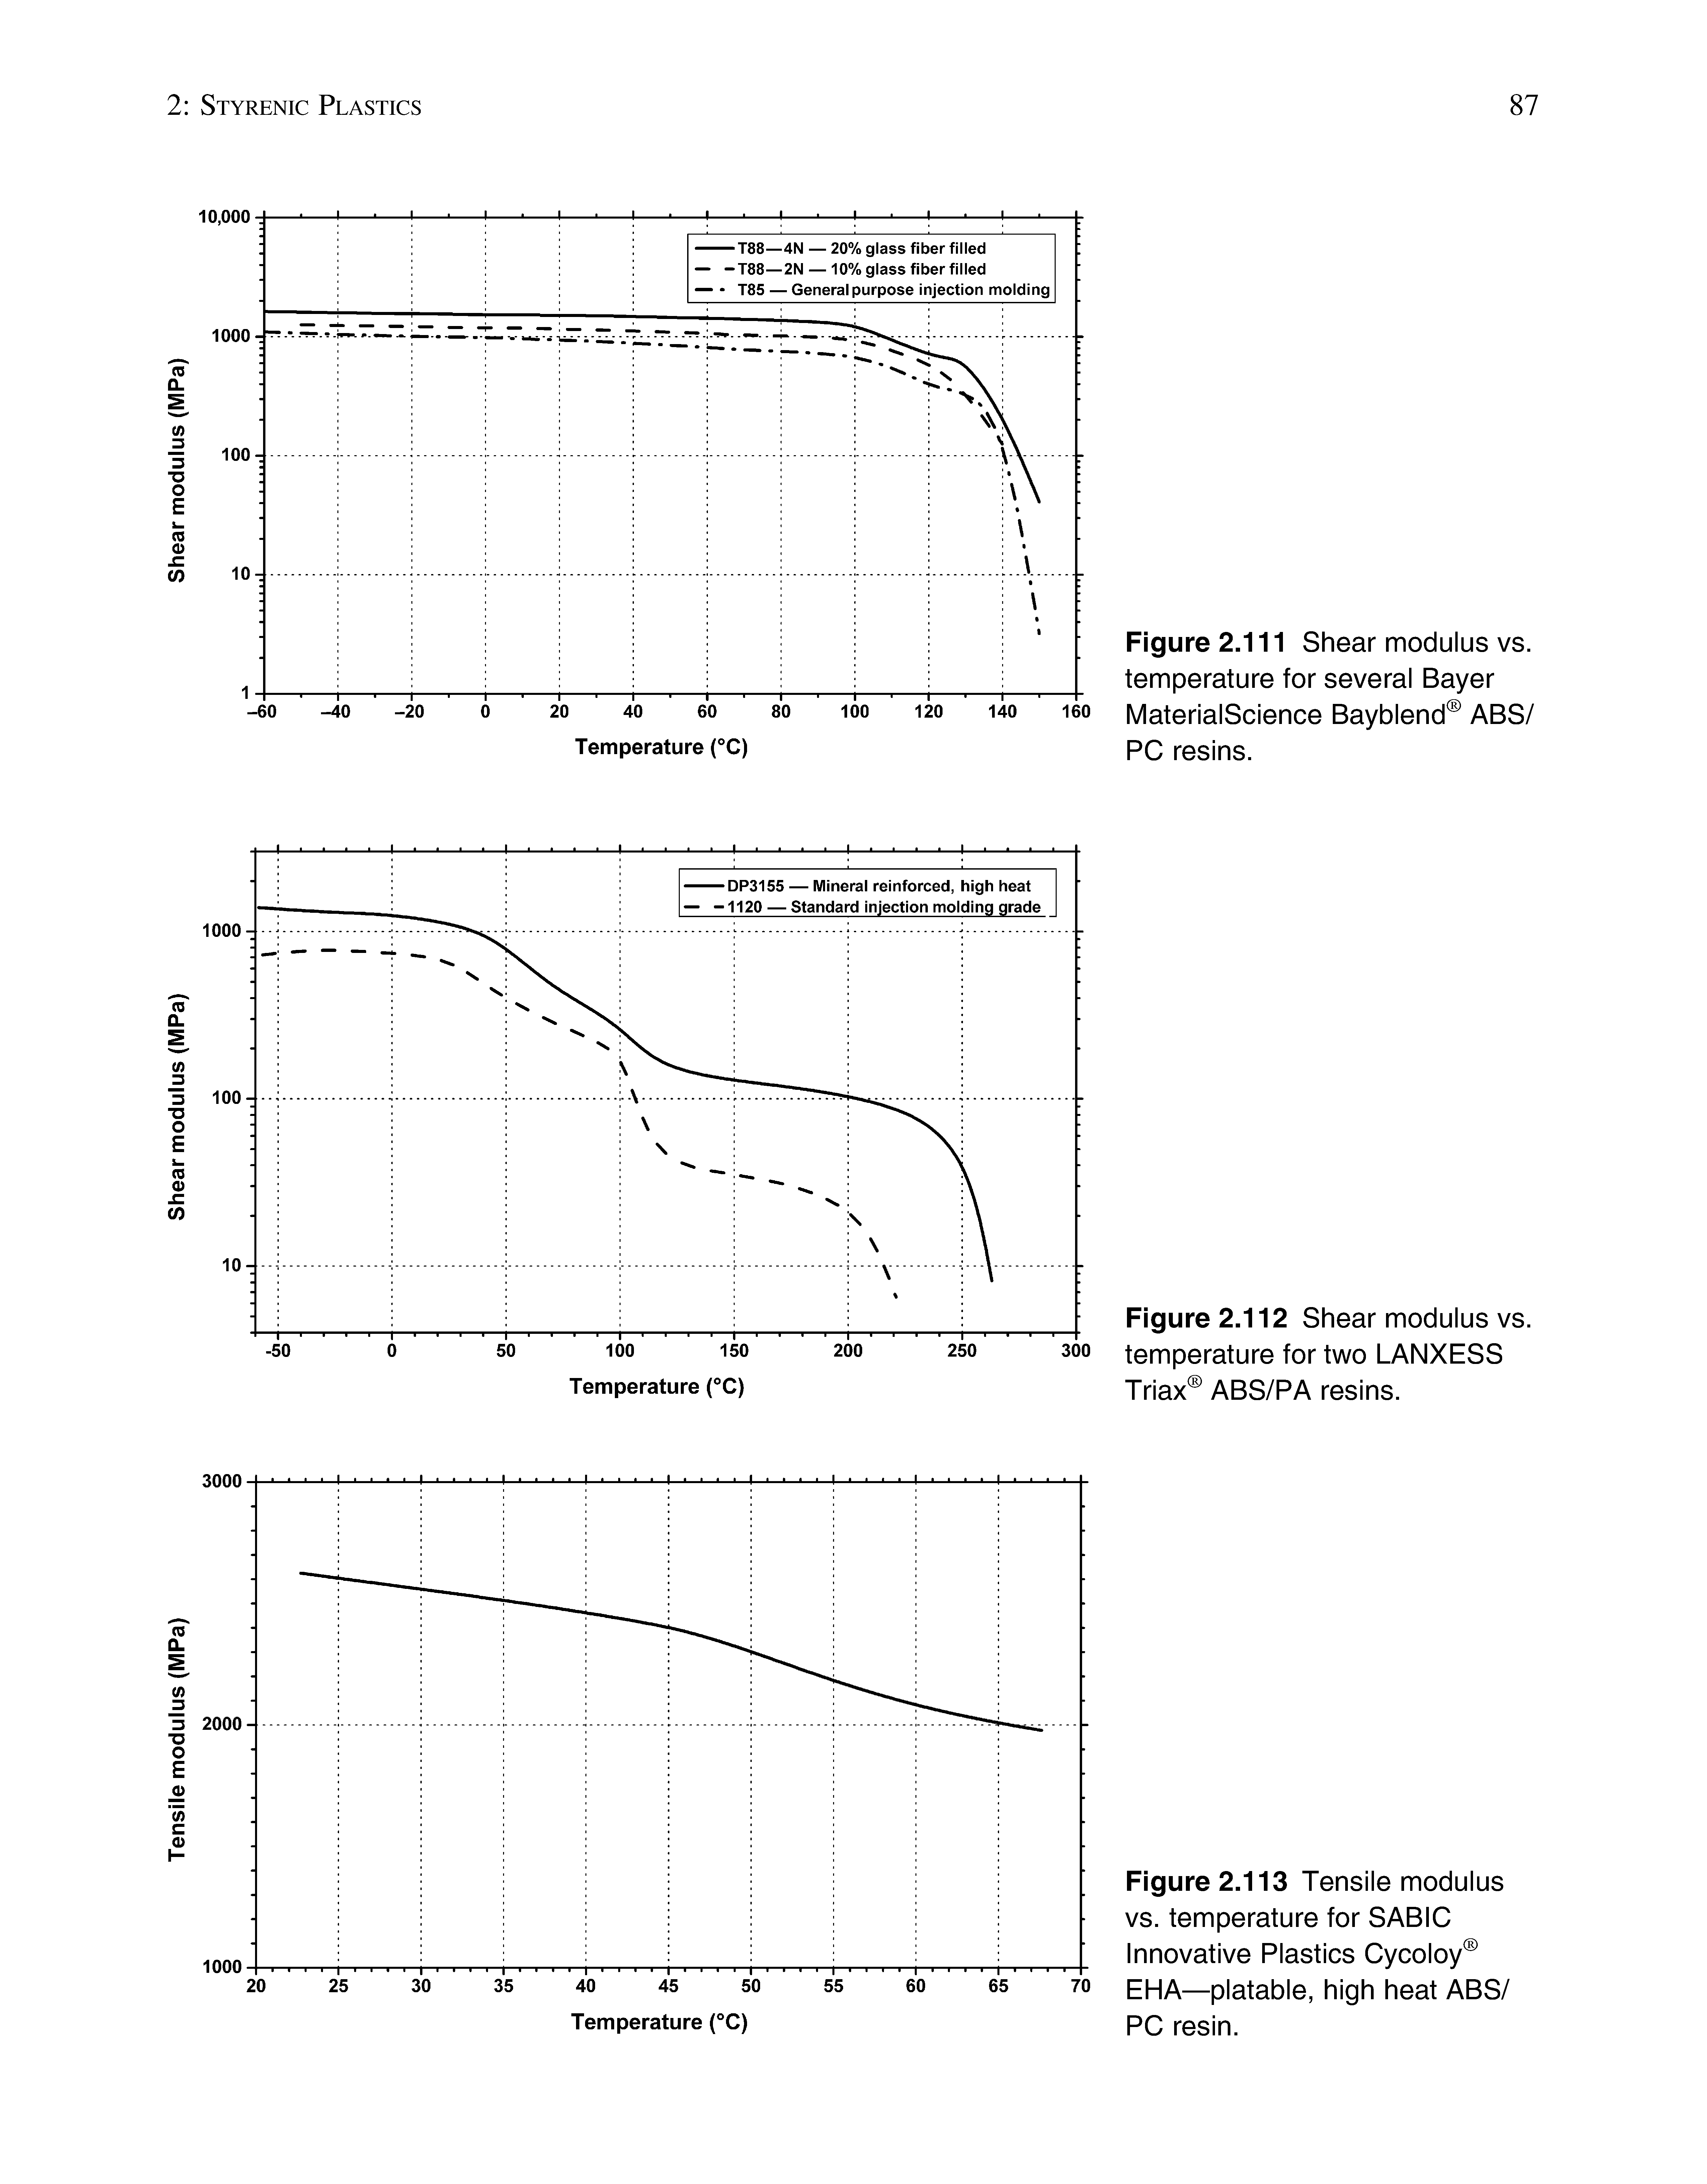 Figure 2.113 Tensile modulus vs. temperature for SABIC Innovative Plastics Cycoloy EHA—platable, high heat ABS/ PC resin.